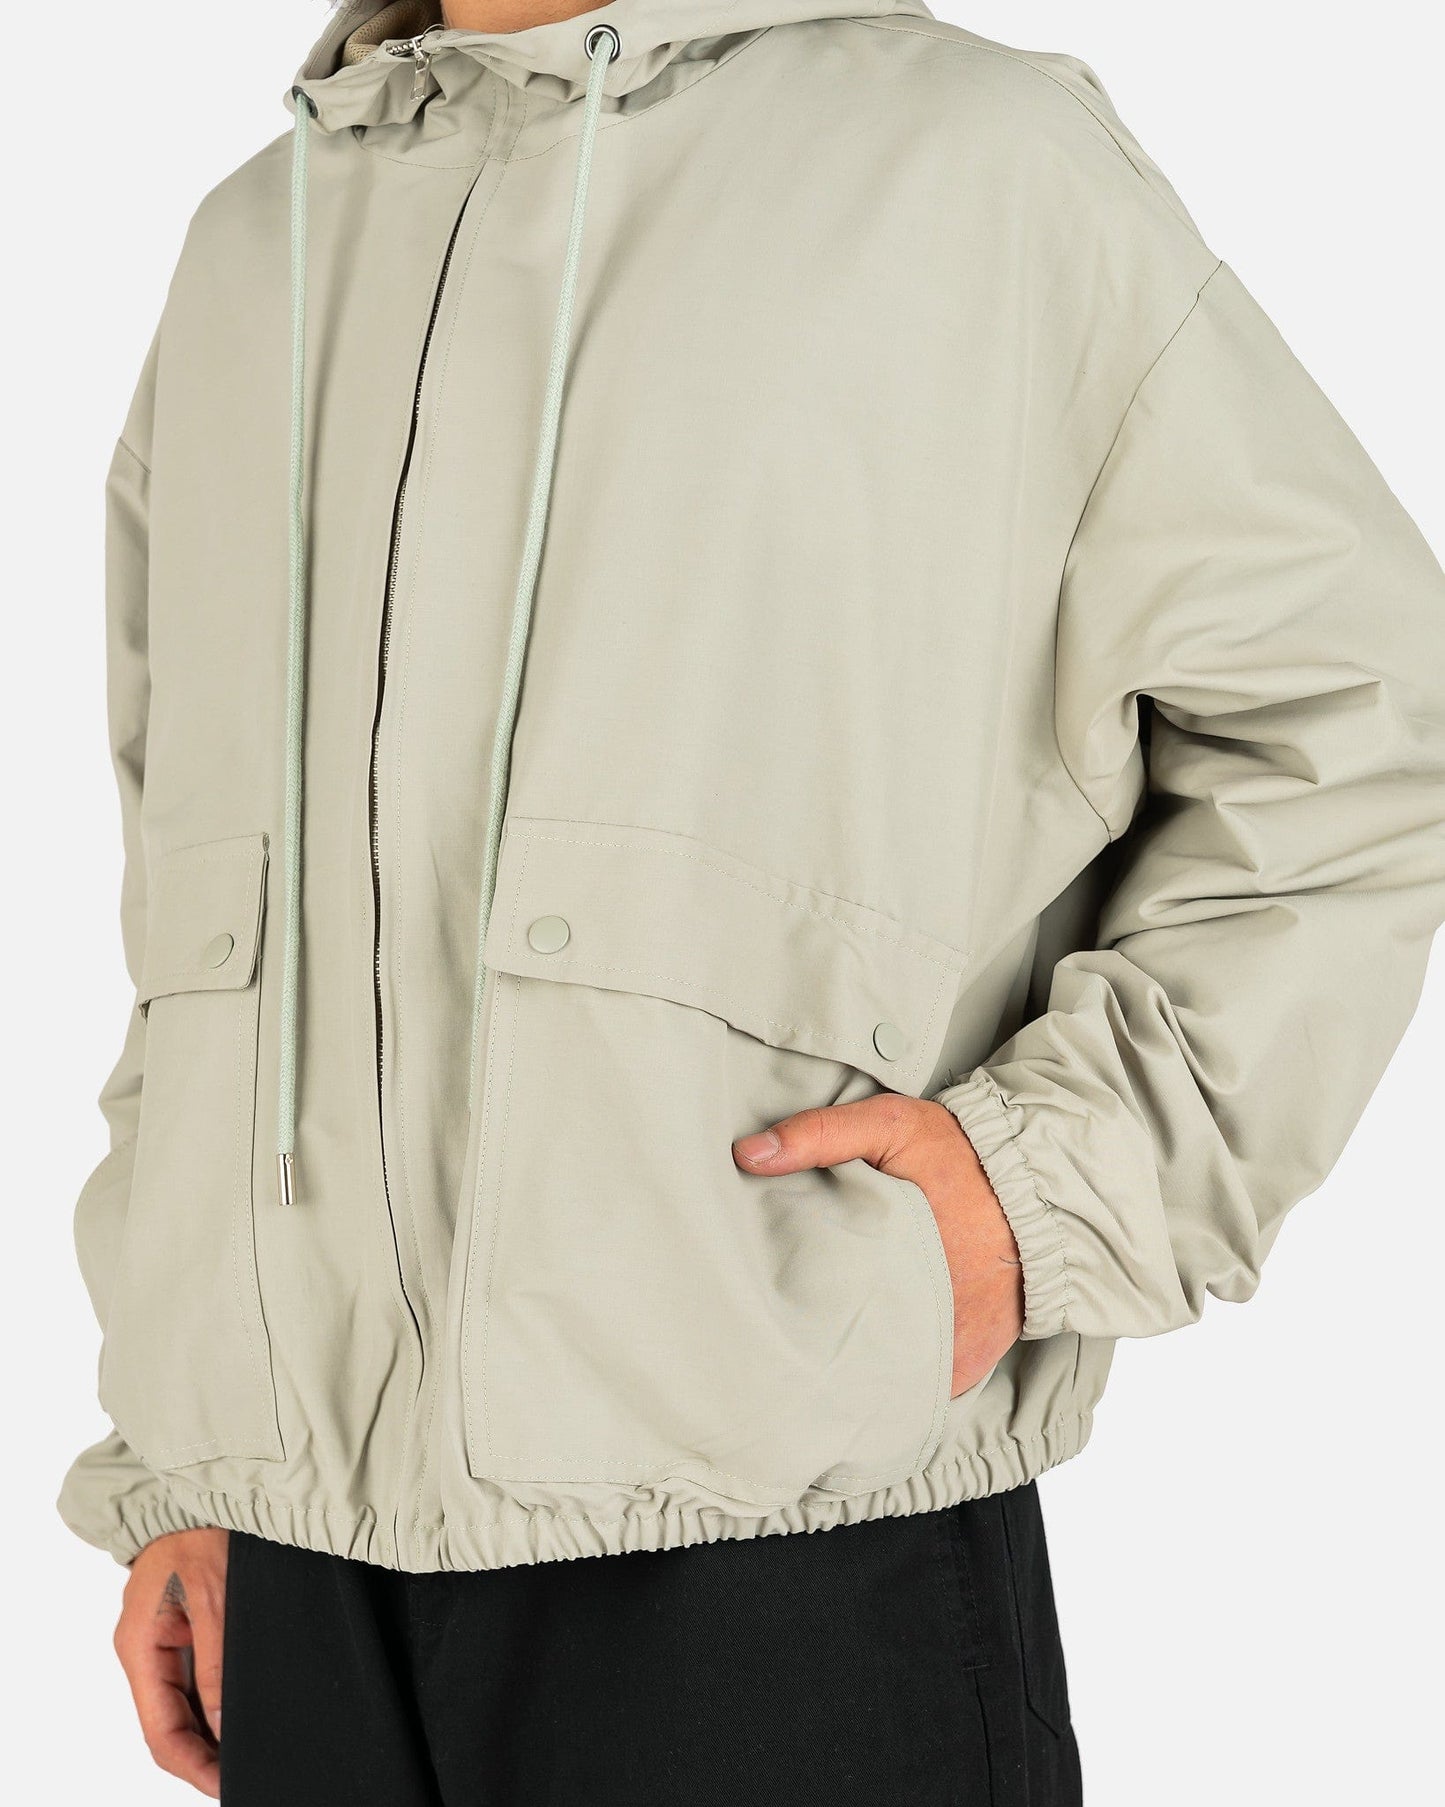 Willy Chavarria Men's Jackets Hoodie Parka Full Zip in Light Green